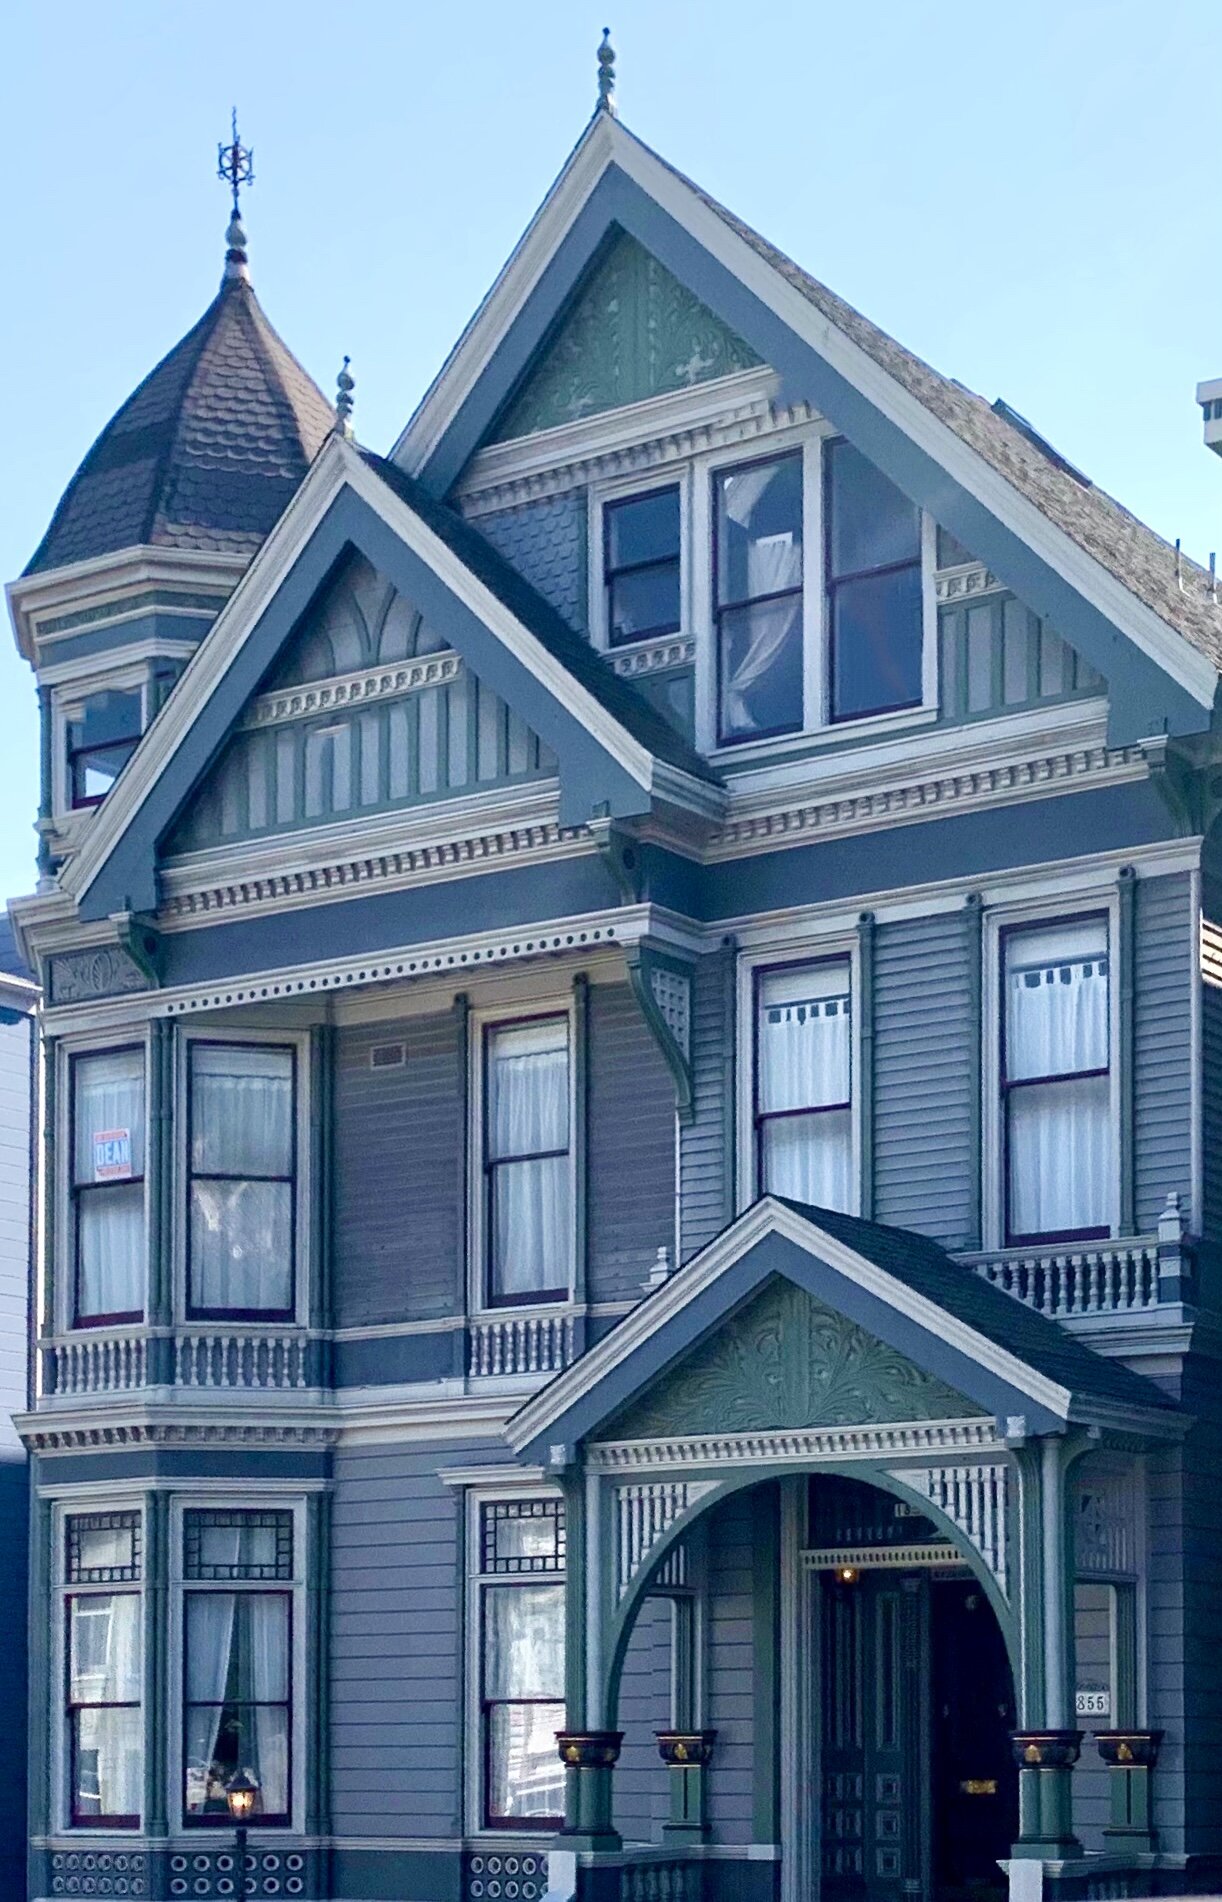  We enjoyed driving all over San Francisco and seeing one if its most lovely features—the uniquely beautiful Victorian and Edwardian homes, built from 1820s until the mid 1900s.  